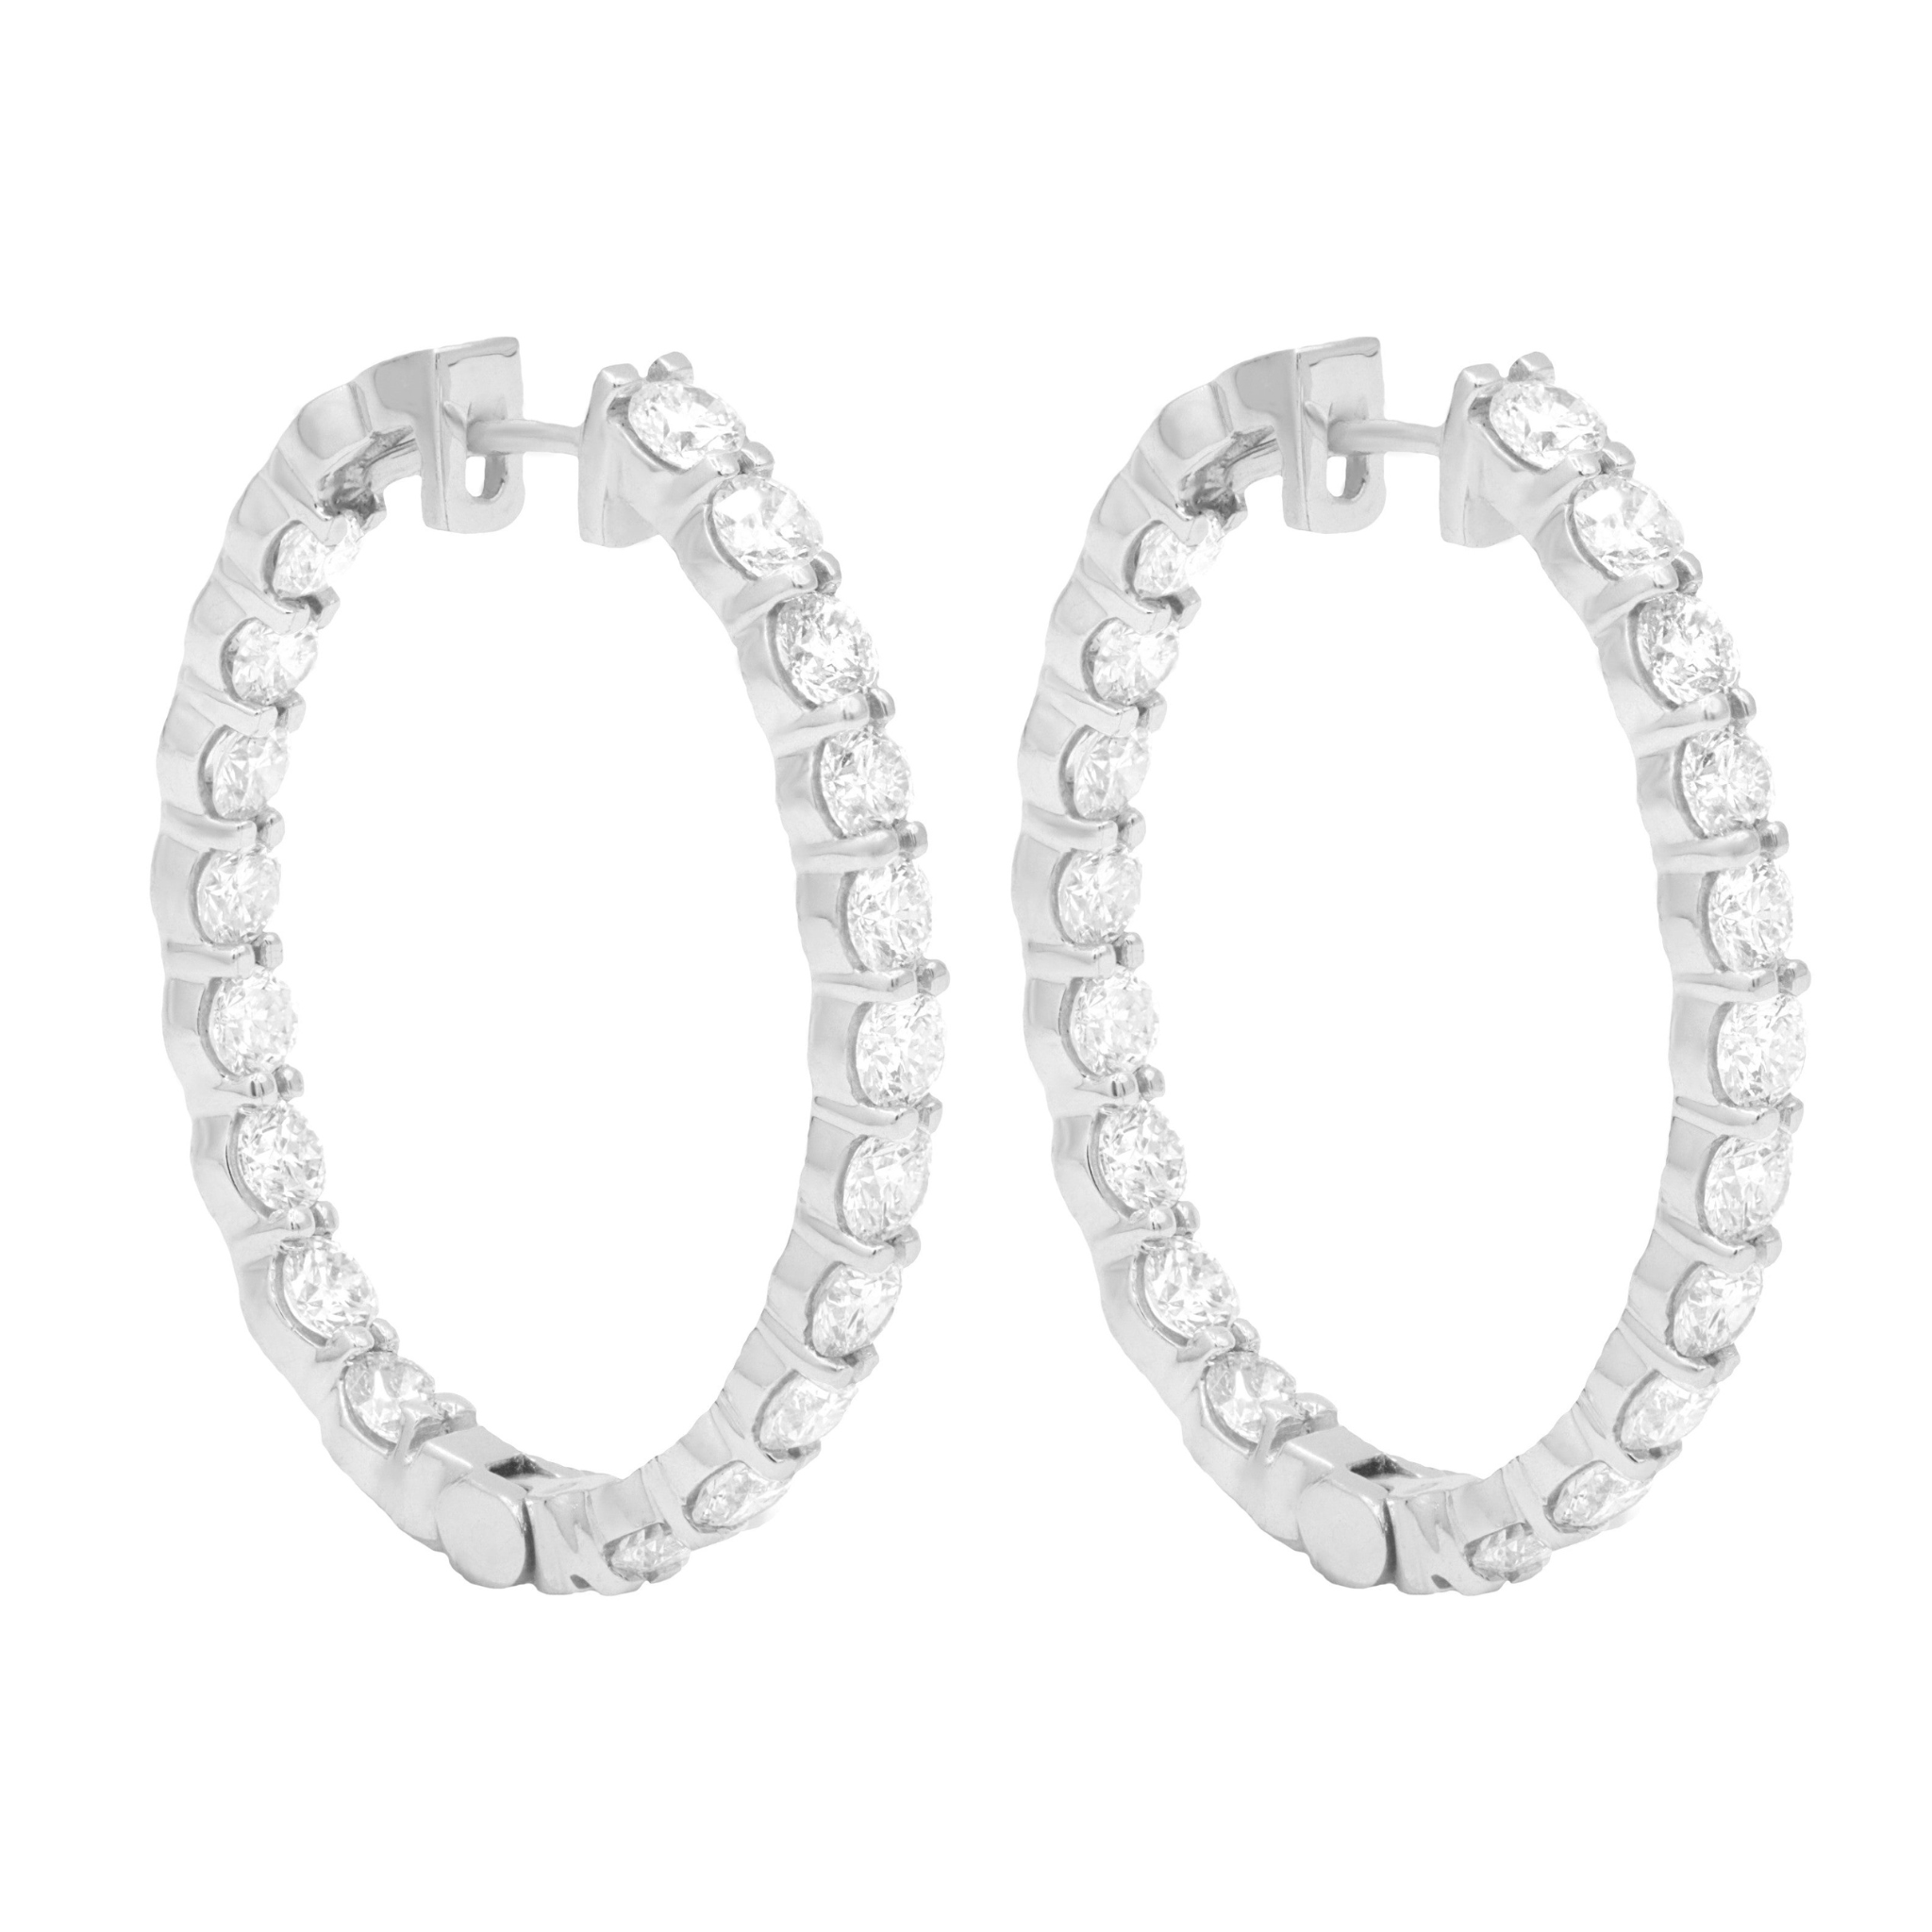 14 Kt White Gold 1.50" Hoop Earrings with 8.12 cts.jpg